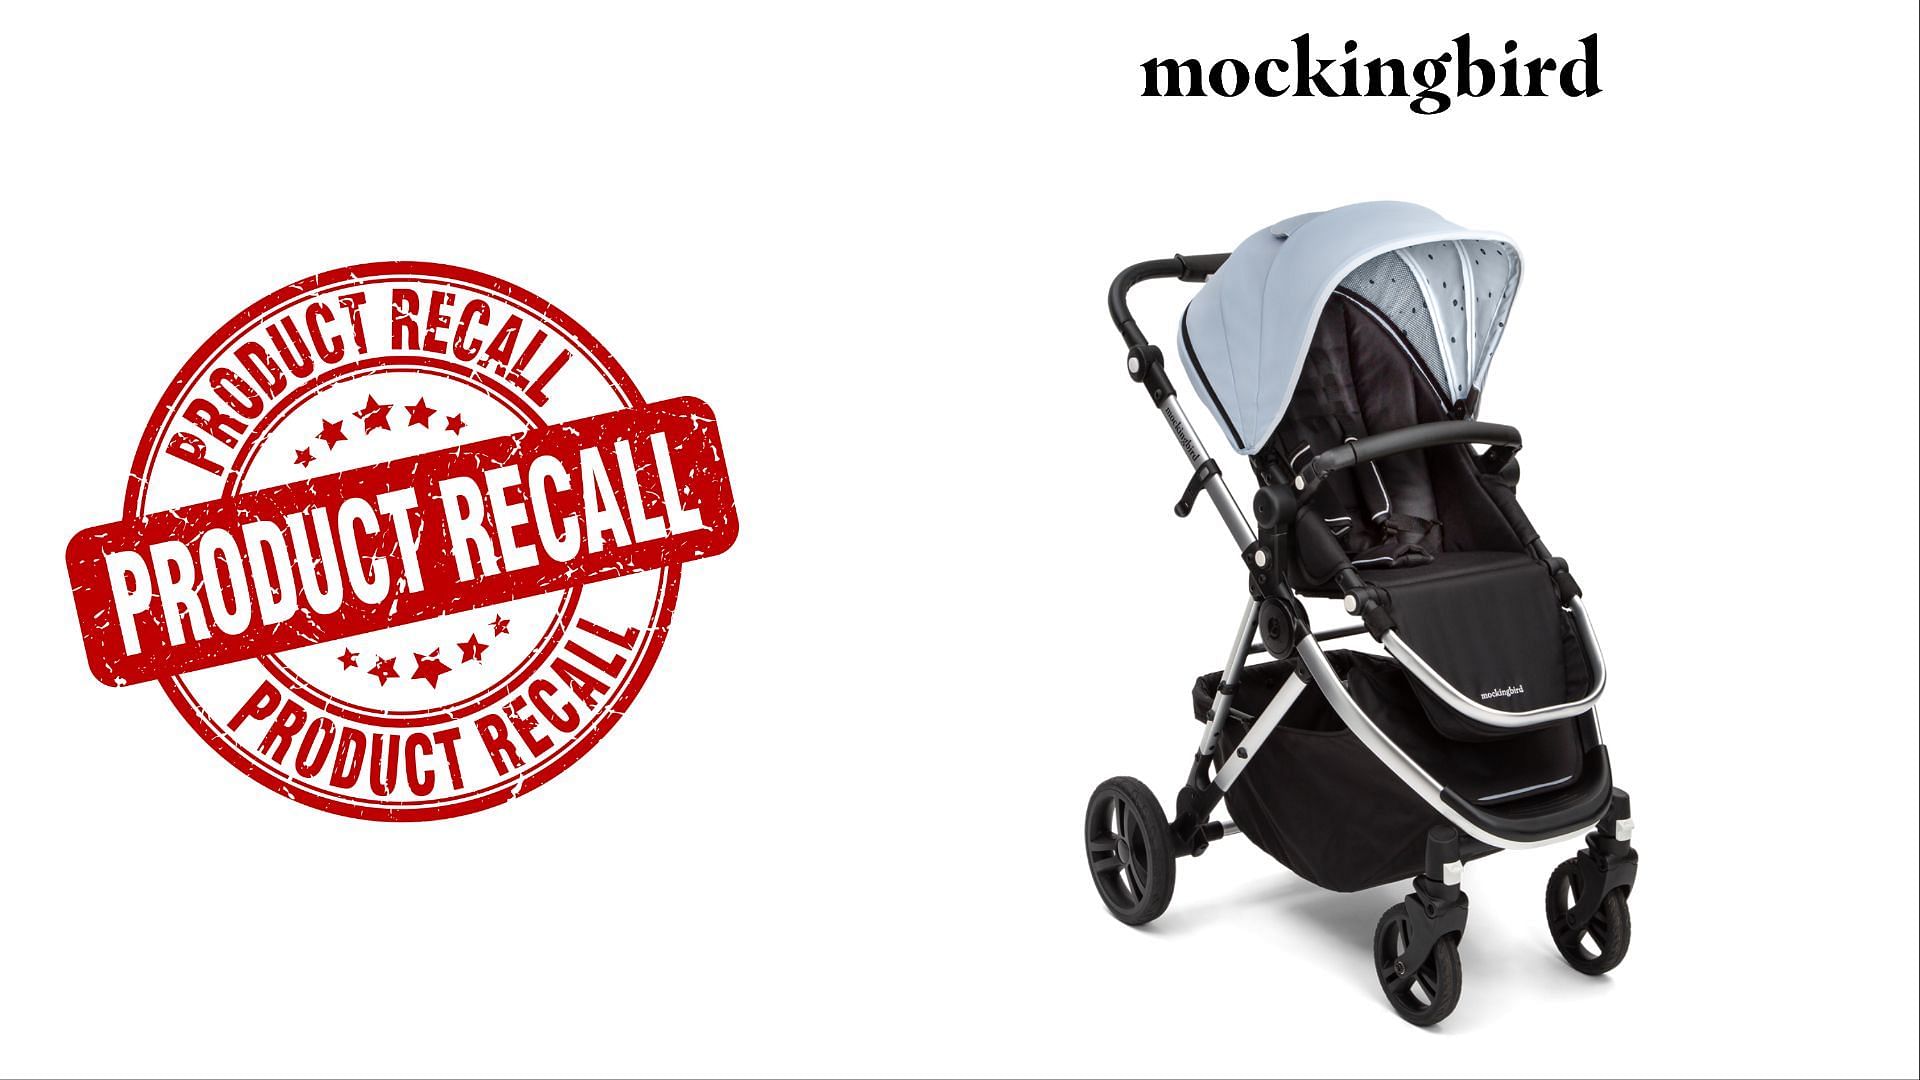 Mockingbird Single Strollers recalled over concerns about a falling hazard (Image via CPSC)